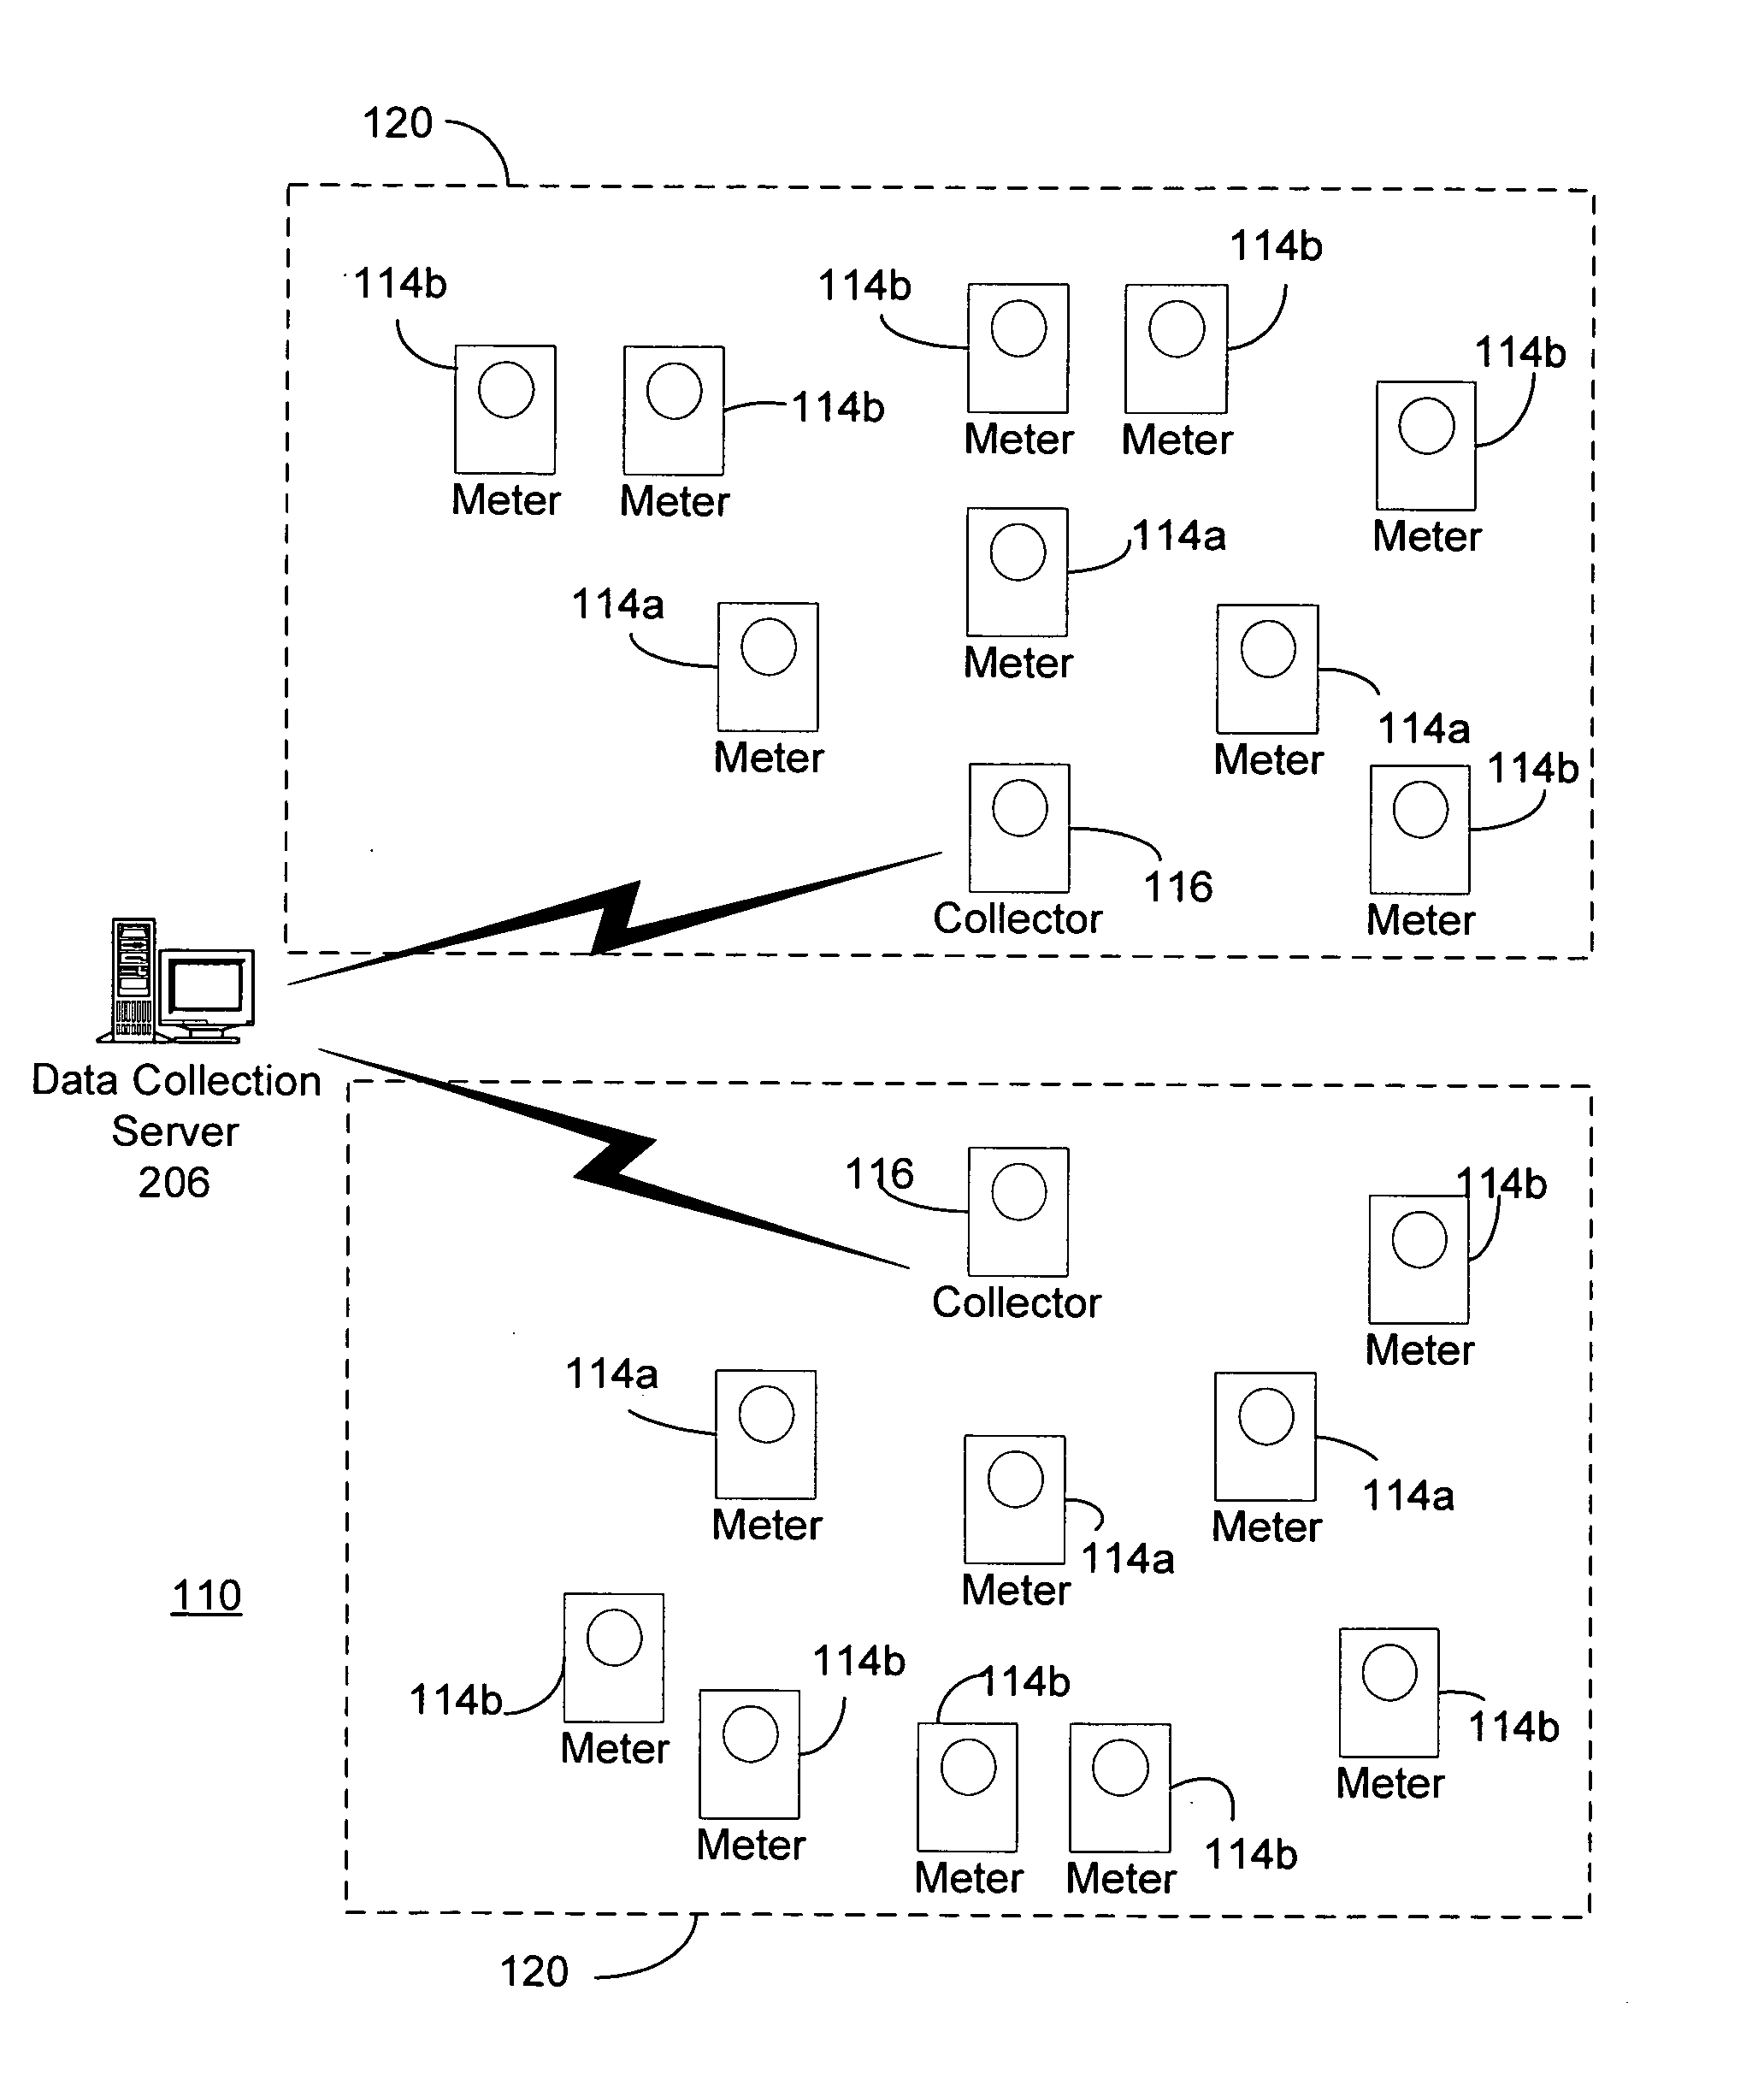 In-home display that communicates with a fixed network meter reading system